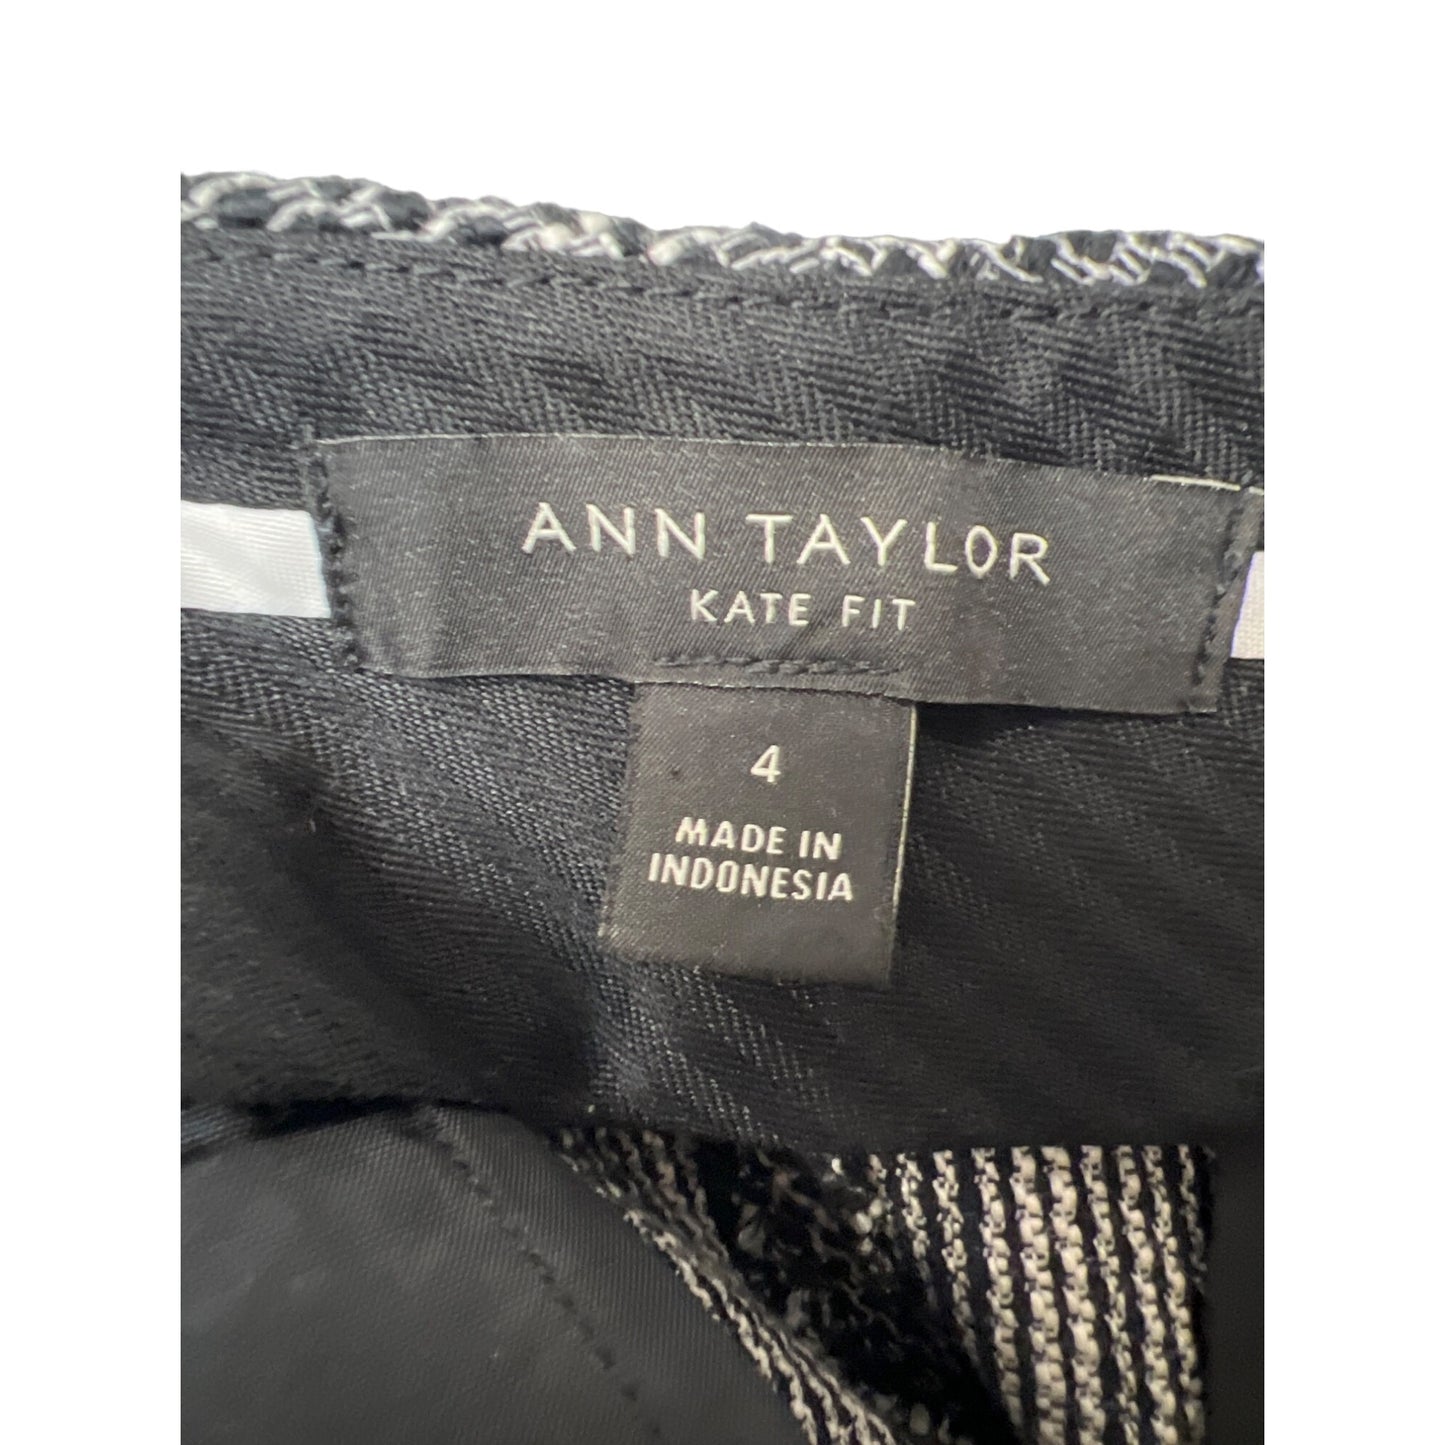 Ann Taylor Kate Fit Black with White Tweed Cotton Blend Pants